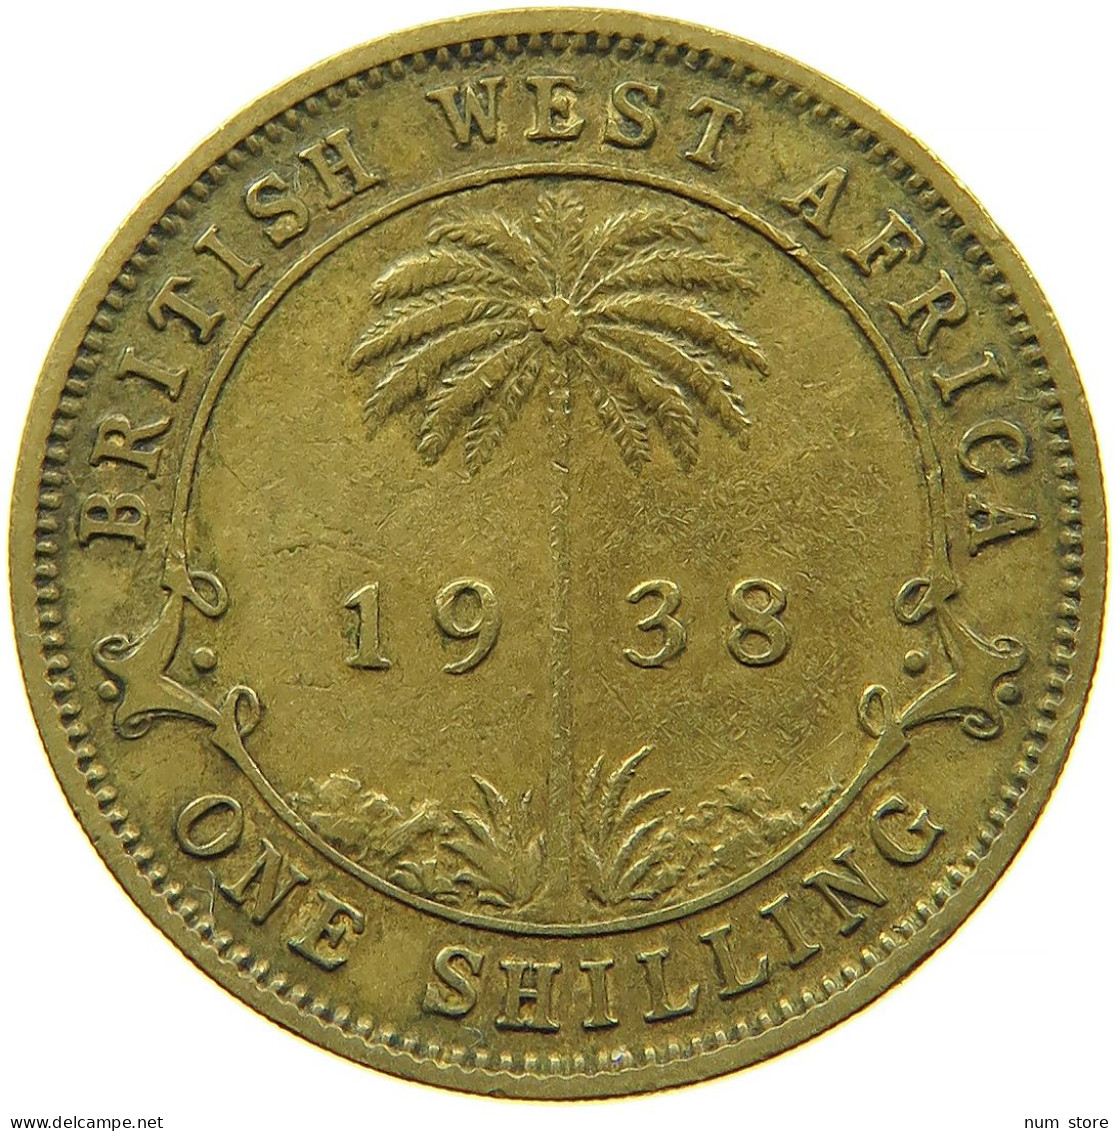 BRITISH WEST AFRICA SHILLING 1938 #s089 0157 - Colonias